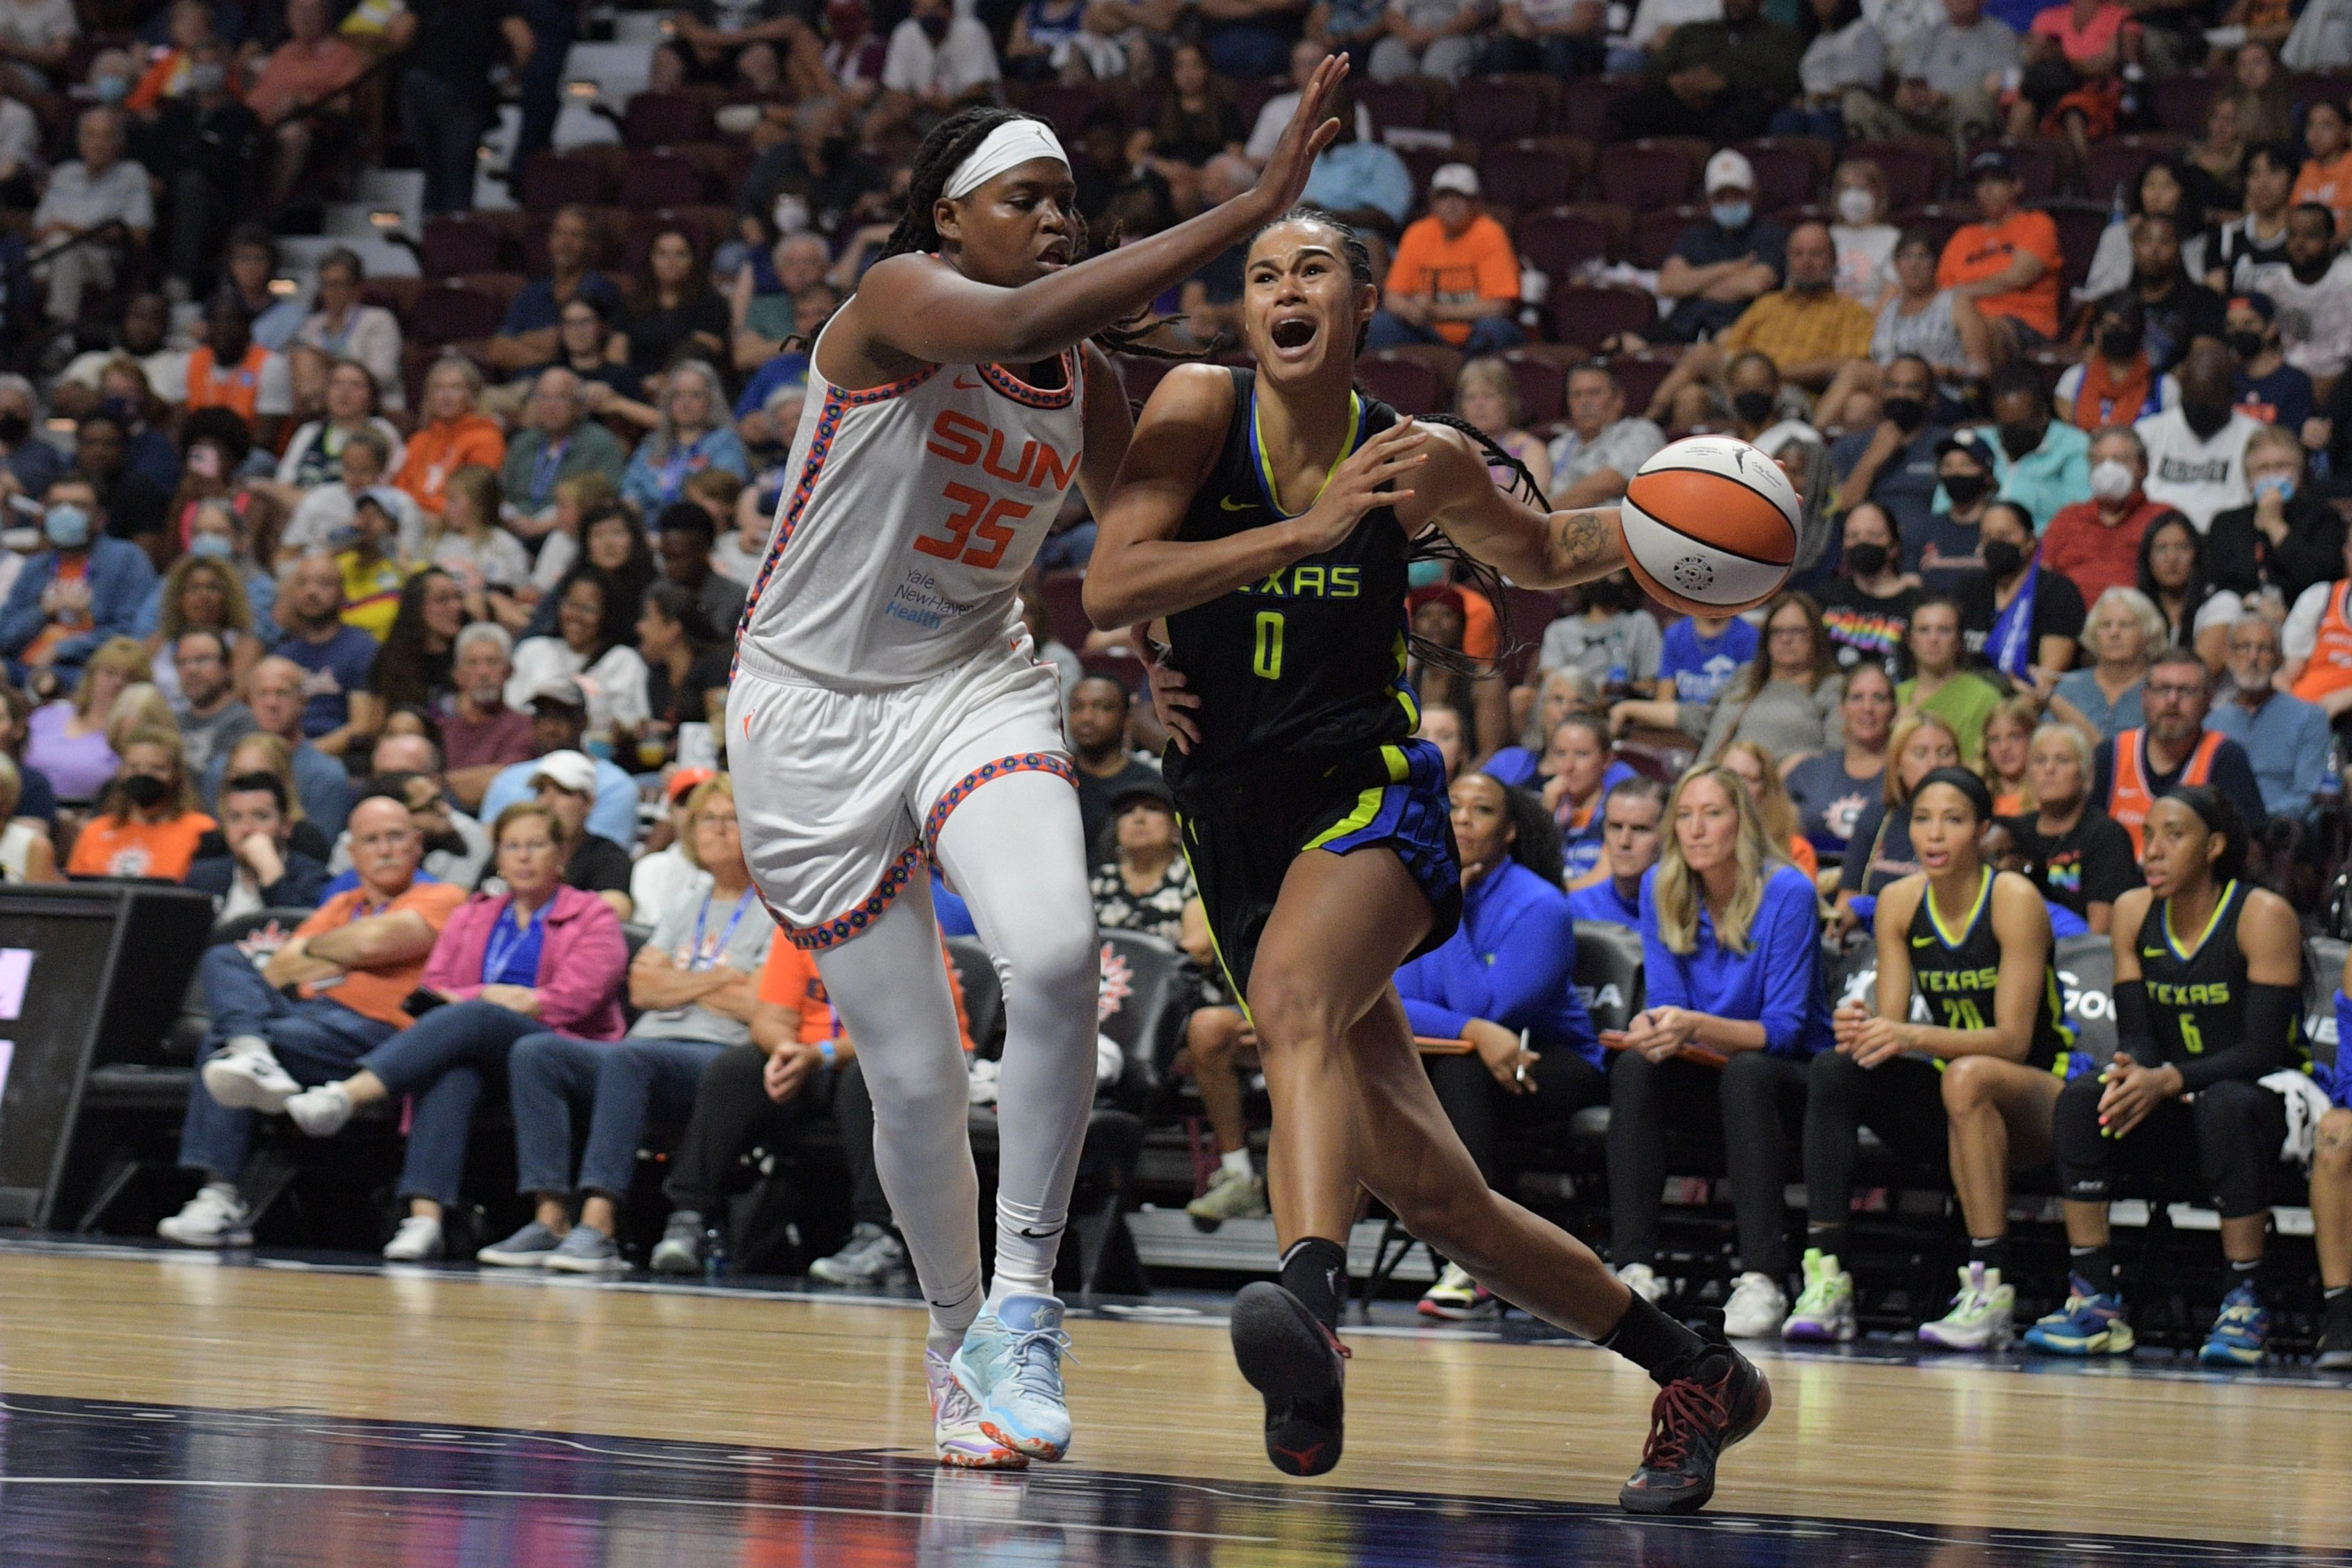 WNBA: AUG 21 Playoffs First Round Dallas Wings at Connecticut Sun